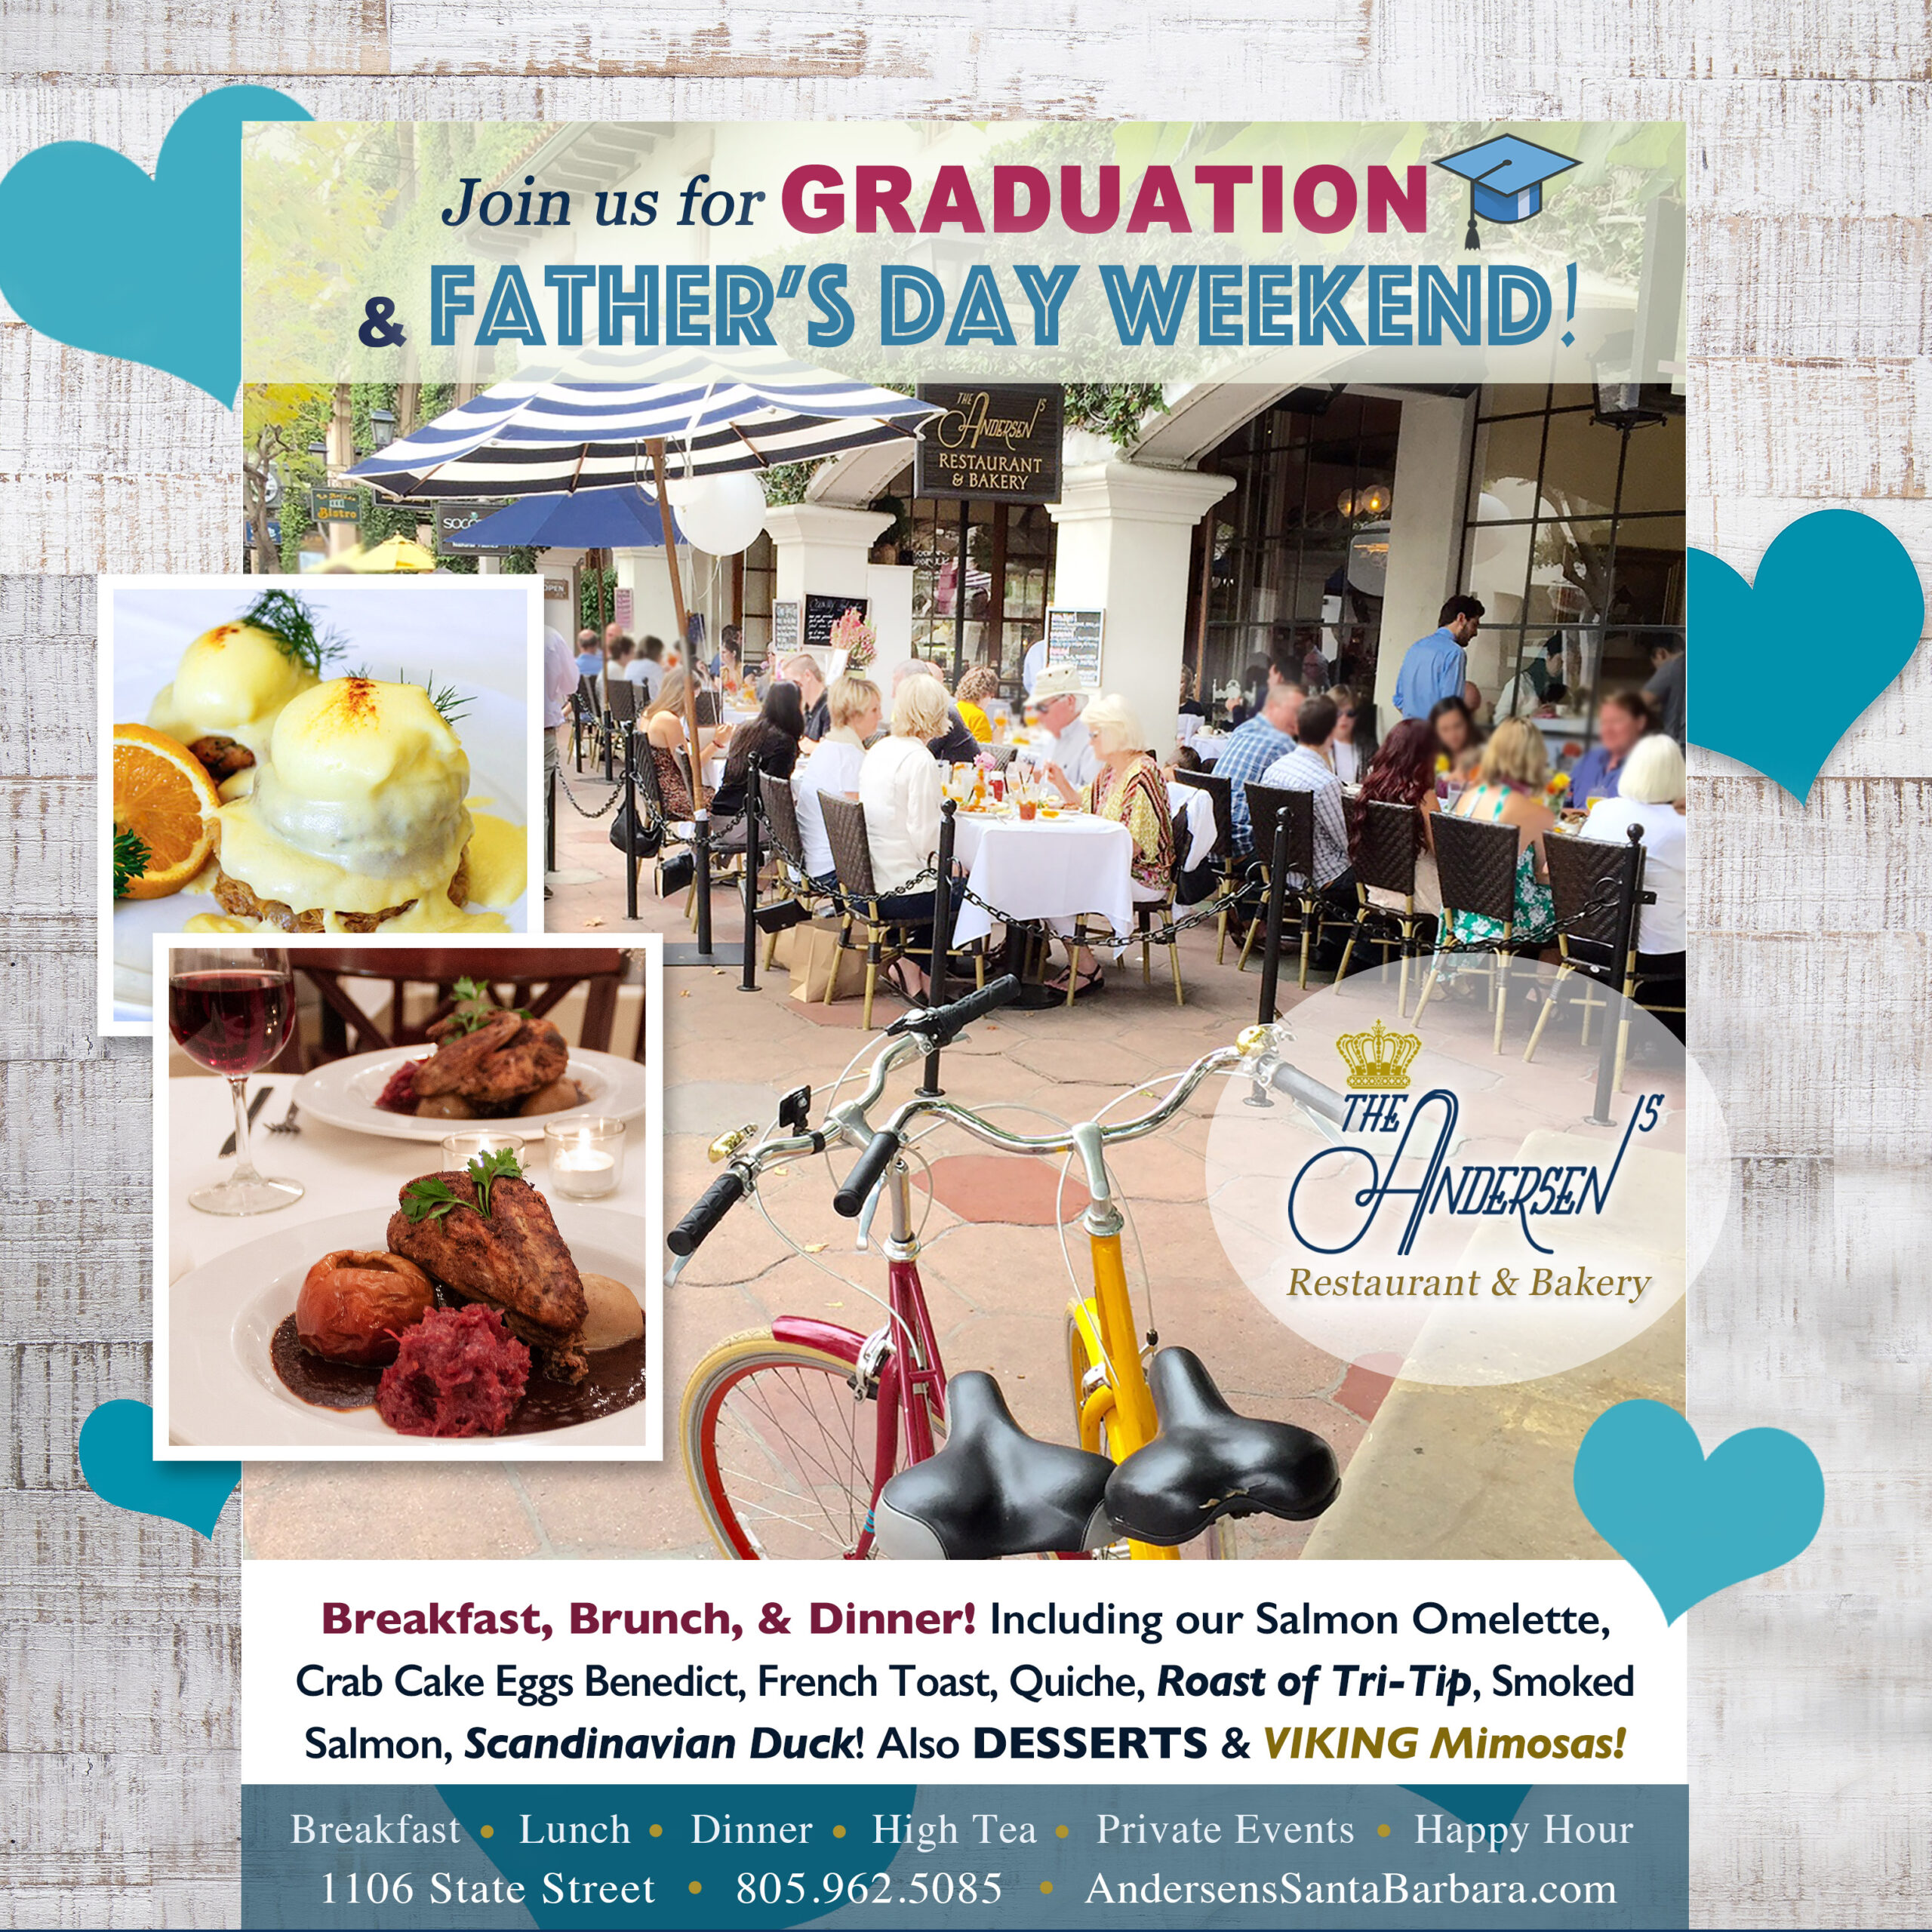 Father's Day Brunch and Lunch menu all weekend in Santa Barbara - The Andersen's